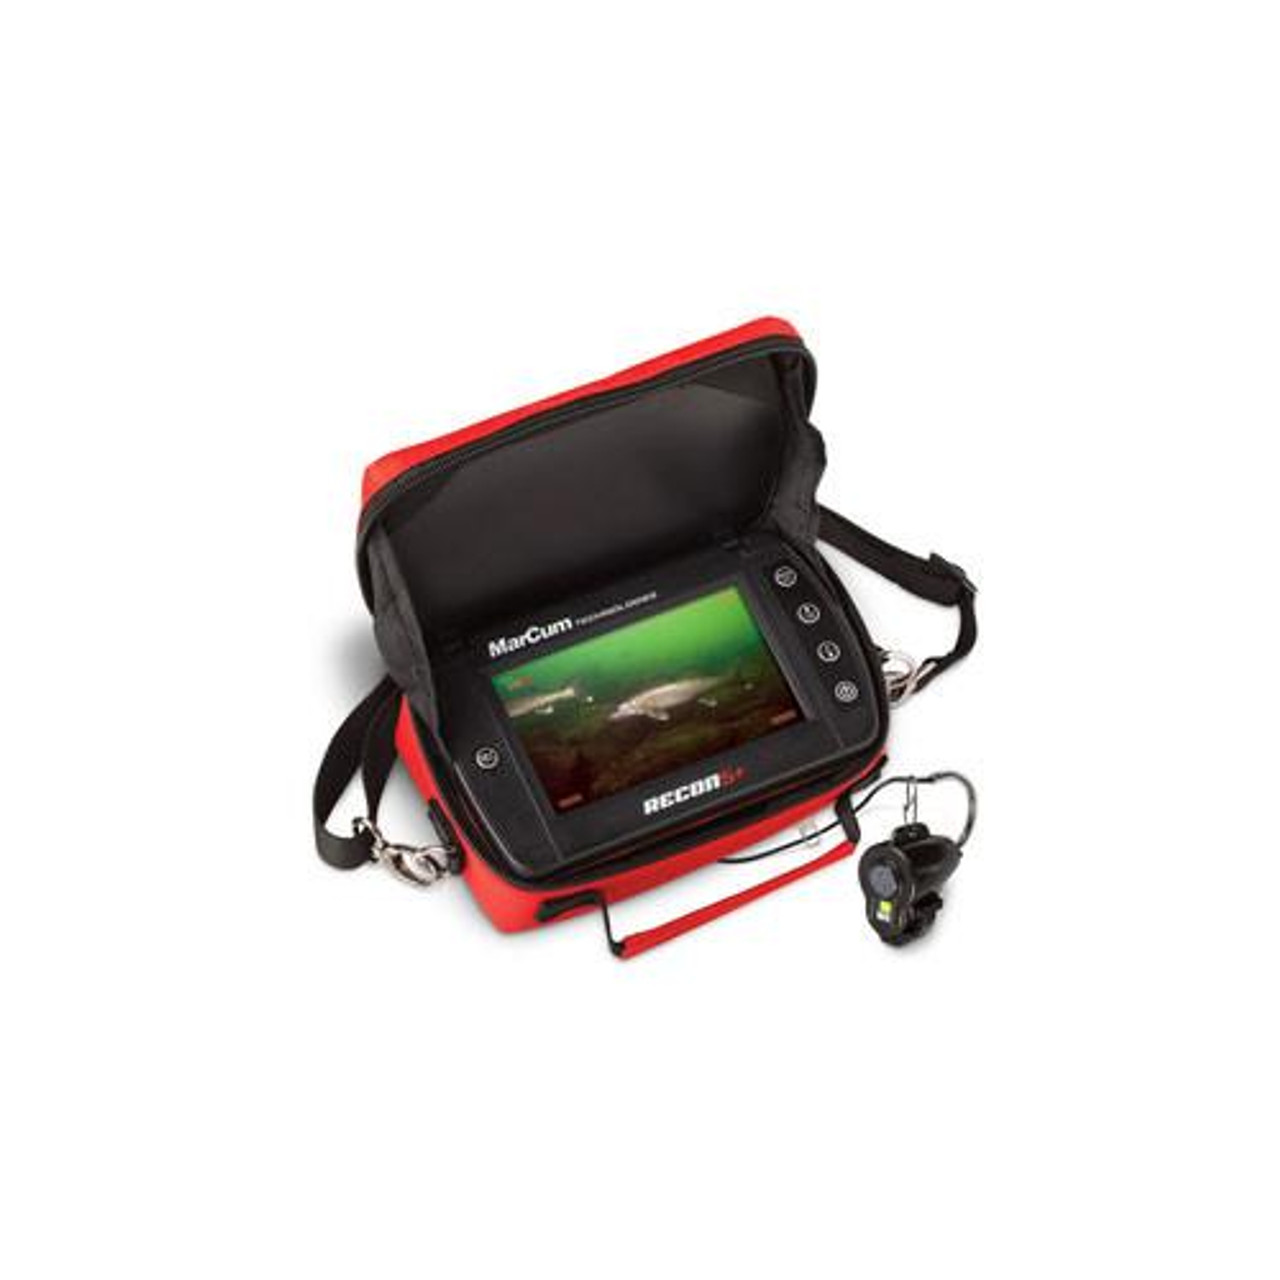 MarCum Compact Recon 5 Underwater Ice Fishing Camera Panner Viewing System